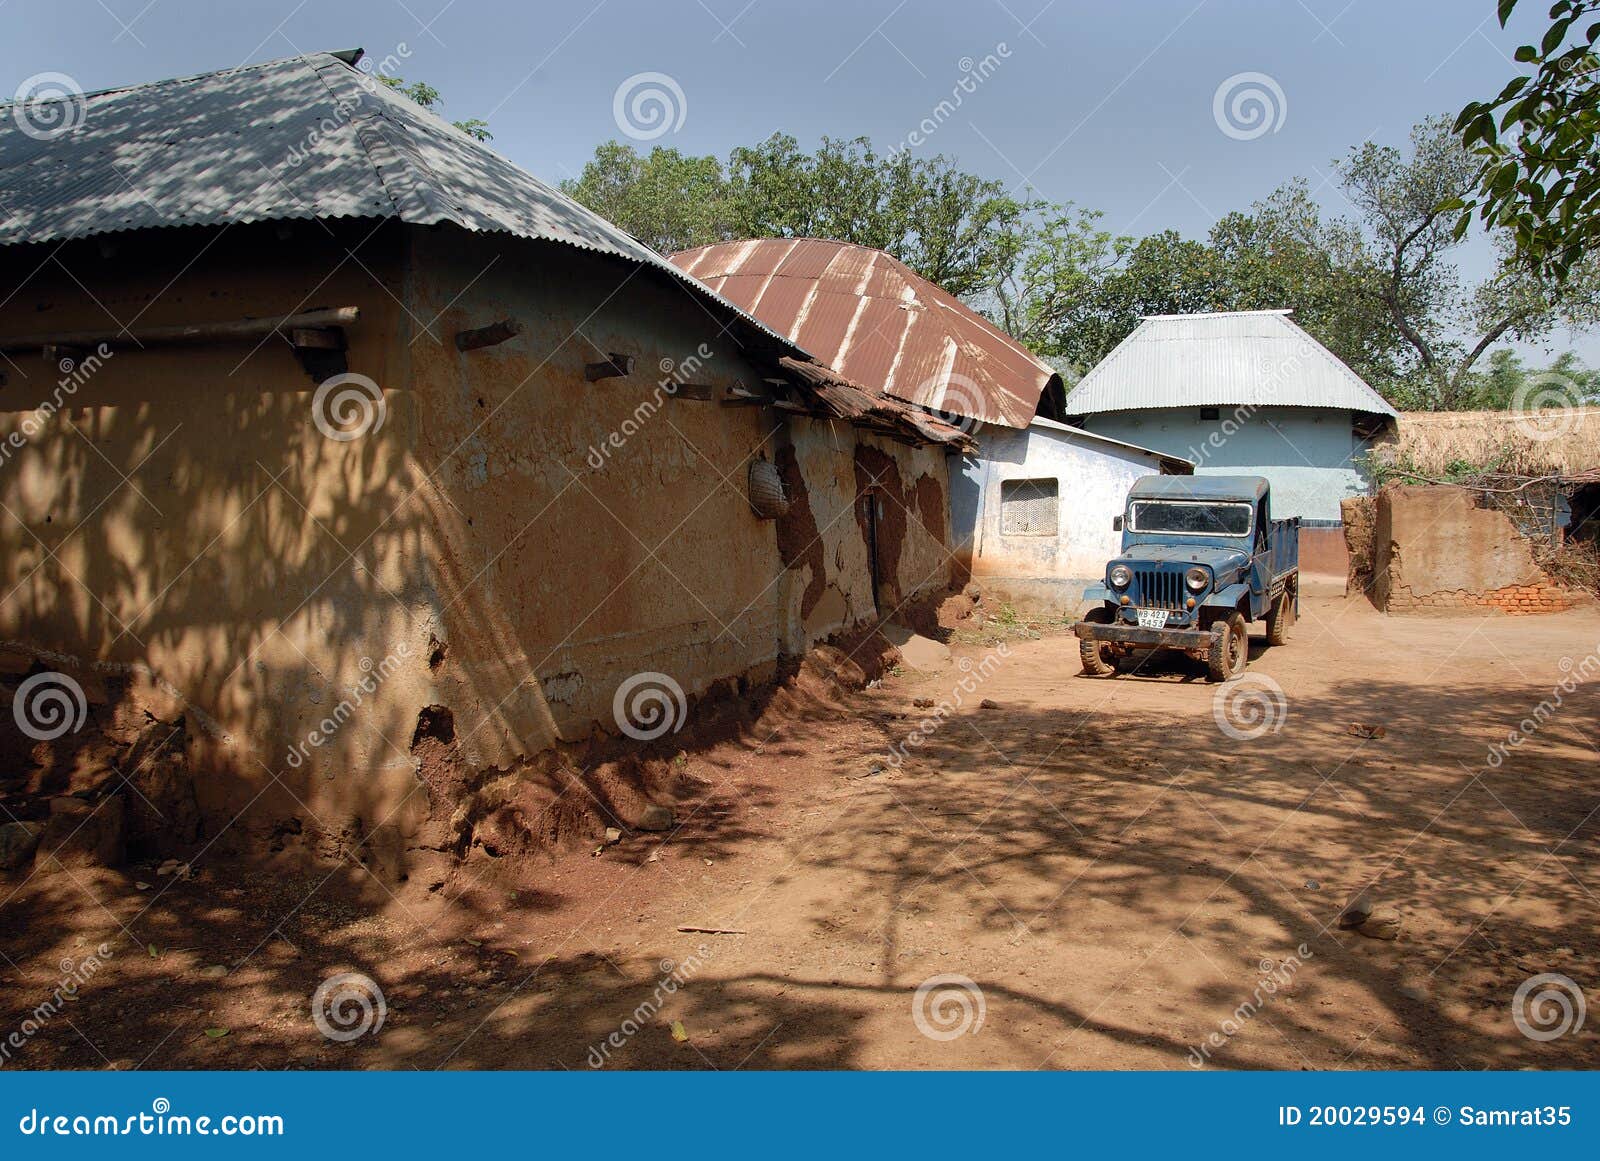 Indian Village life editorial stock image. Image of west - 20029594